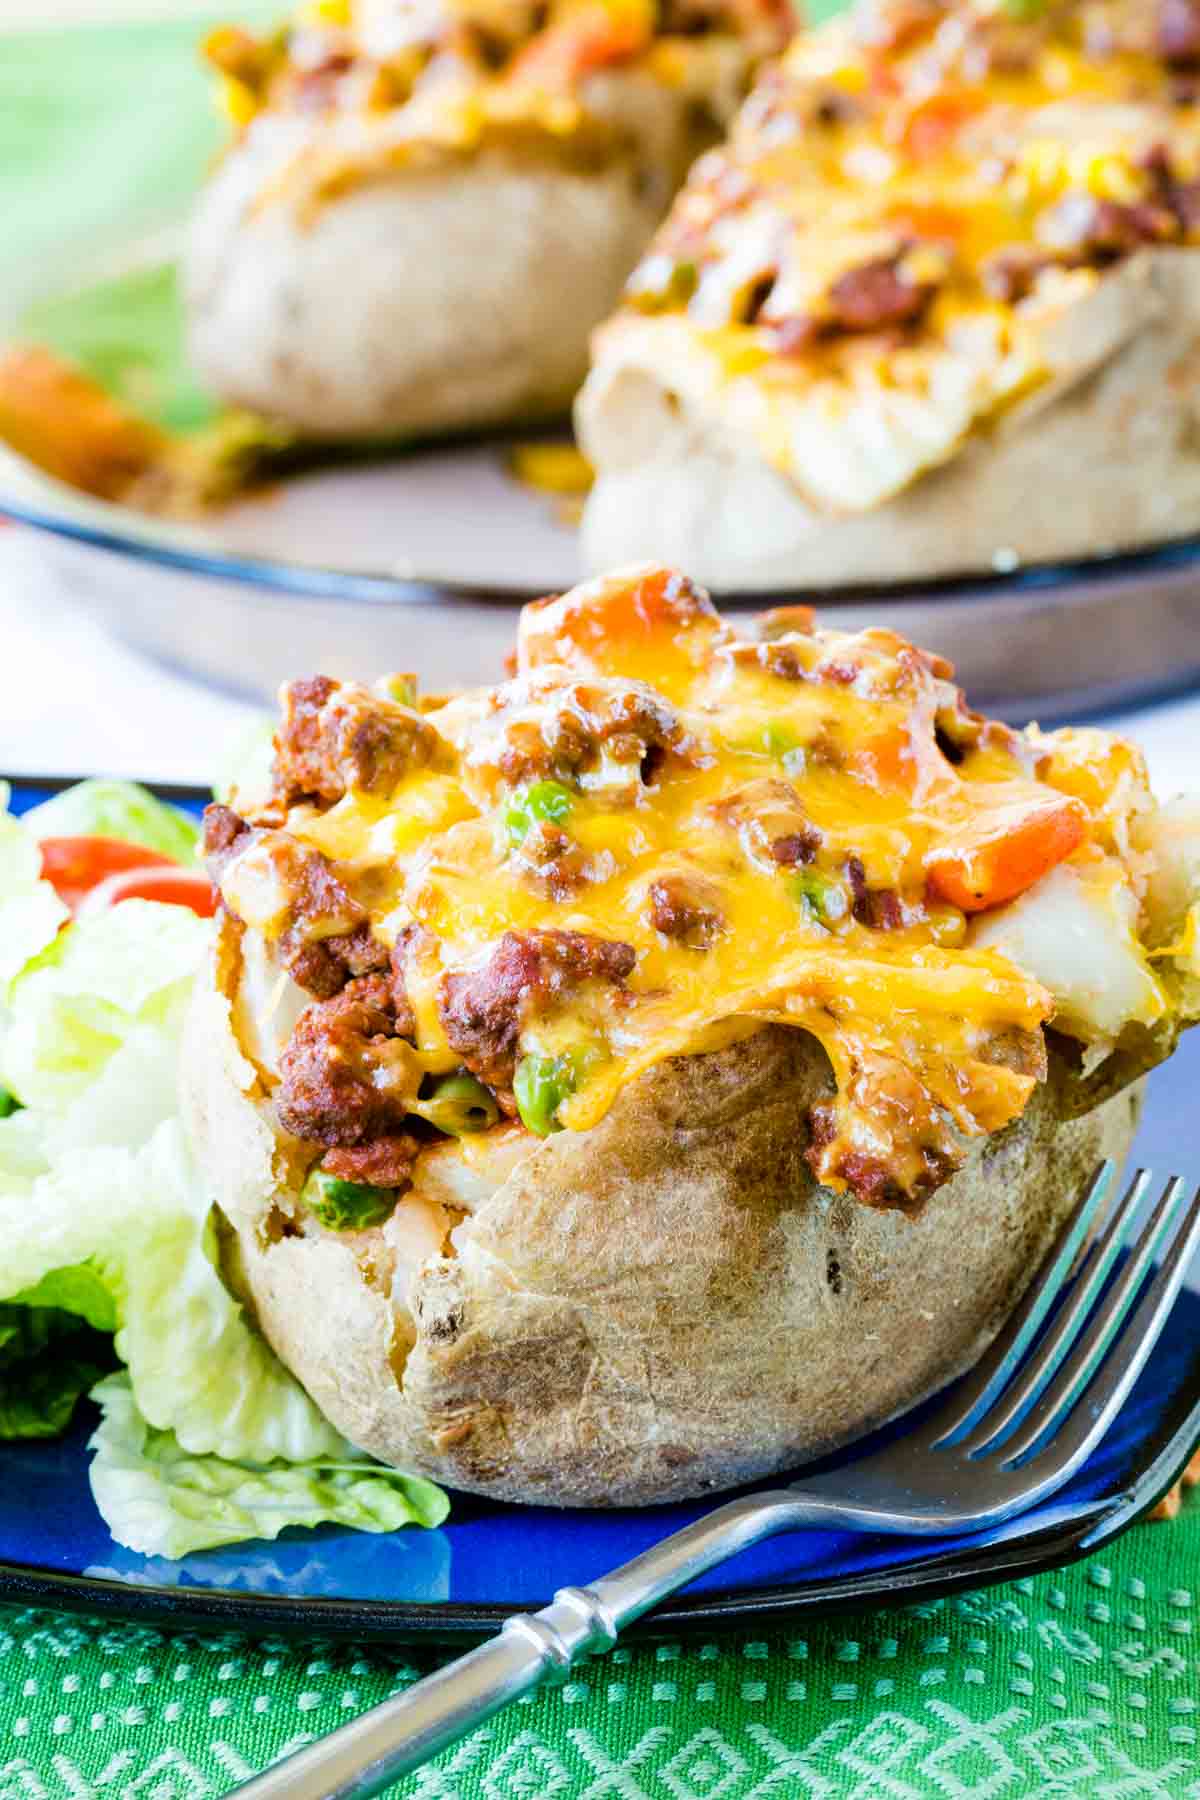 A cottage pie baked potato on a blue plate with a fork and more stuffed baked potatoes in a baking dish in the background.